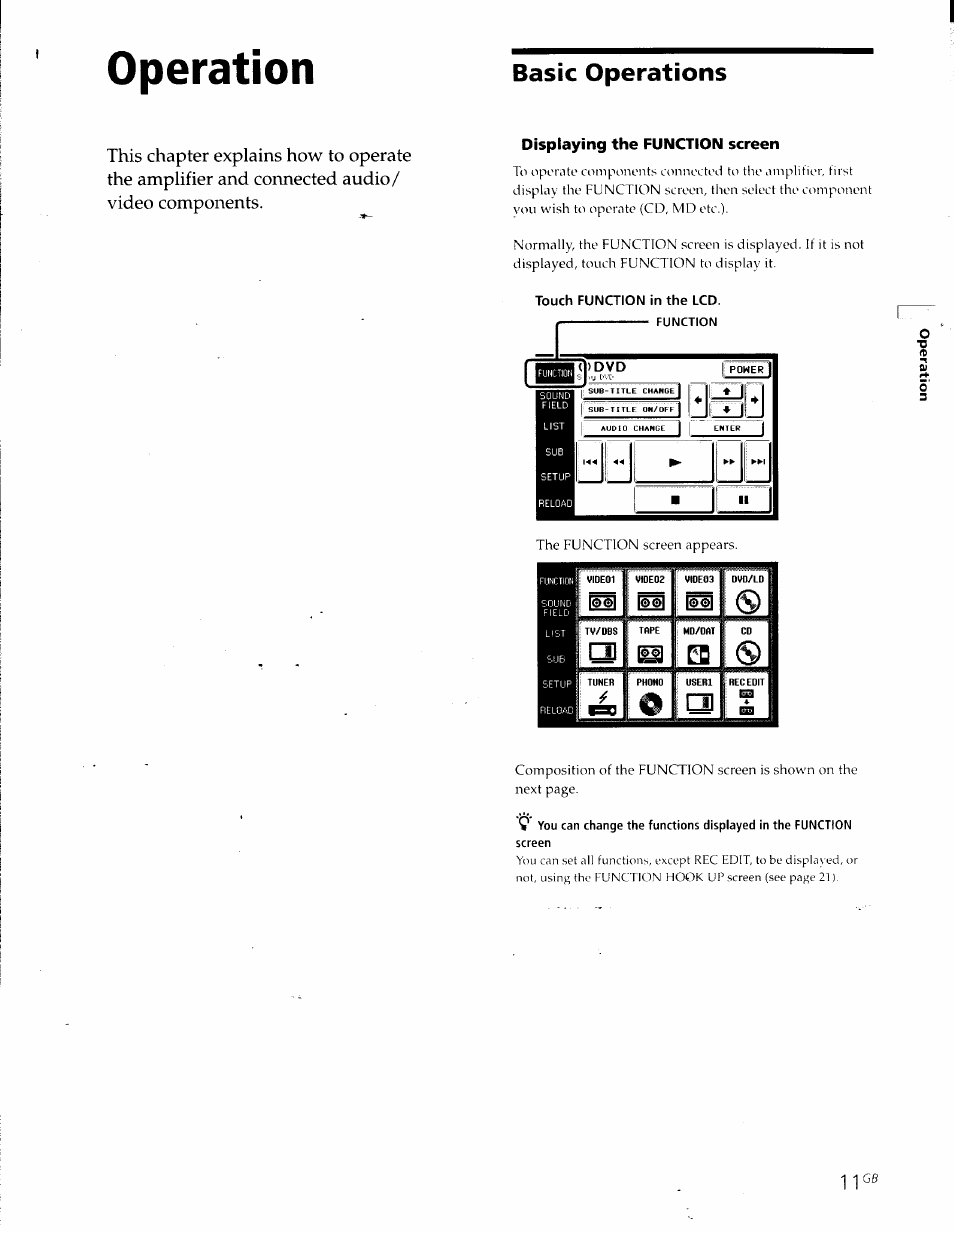 Displaying the function screen, Operation, Basic operations | Sony RM-TP501E Manuel d'utilisation | Page 11 / 49